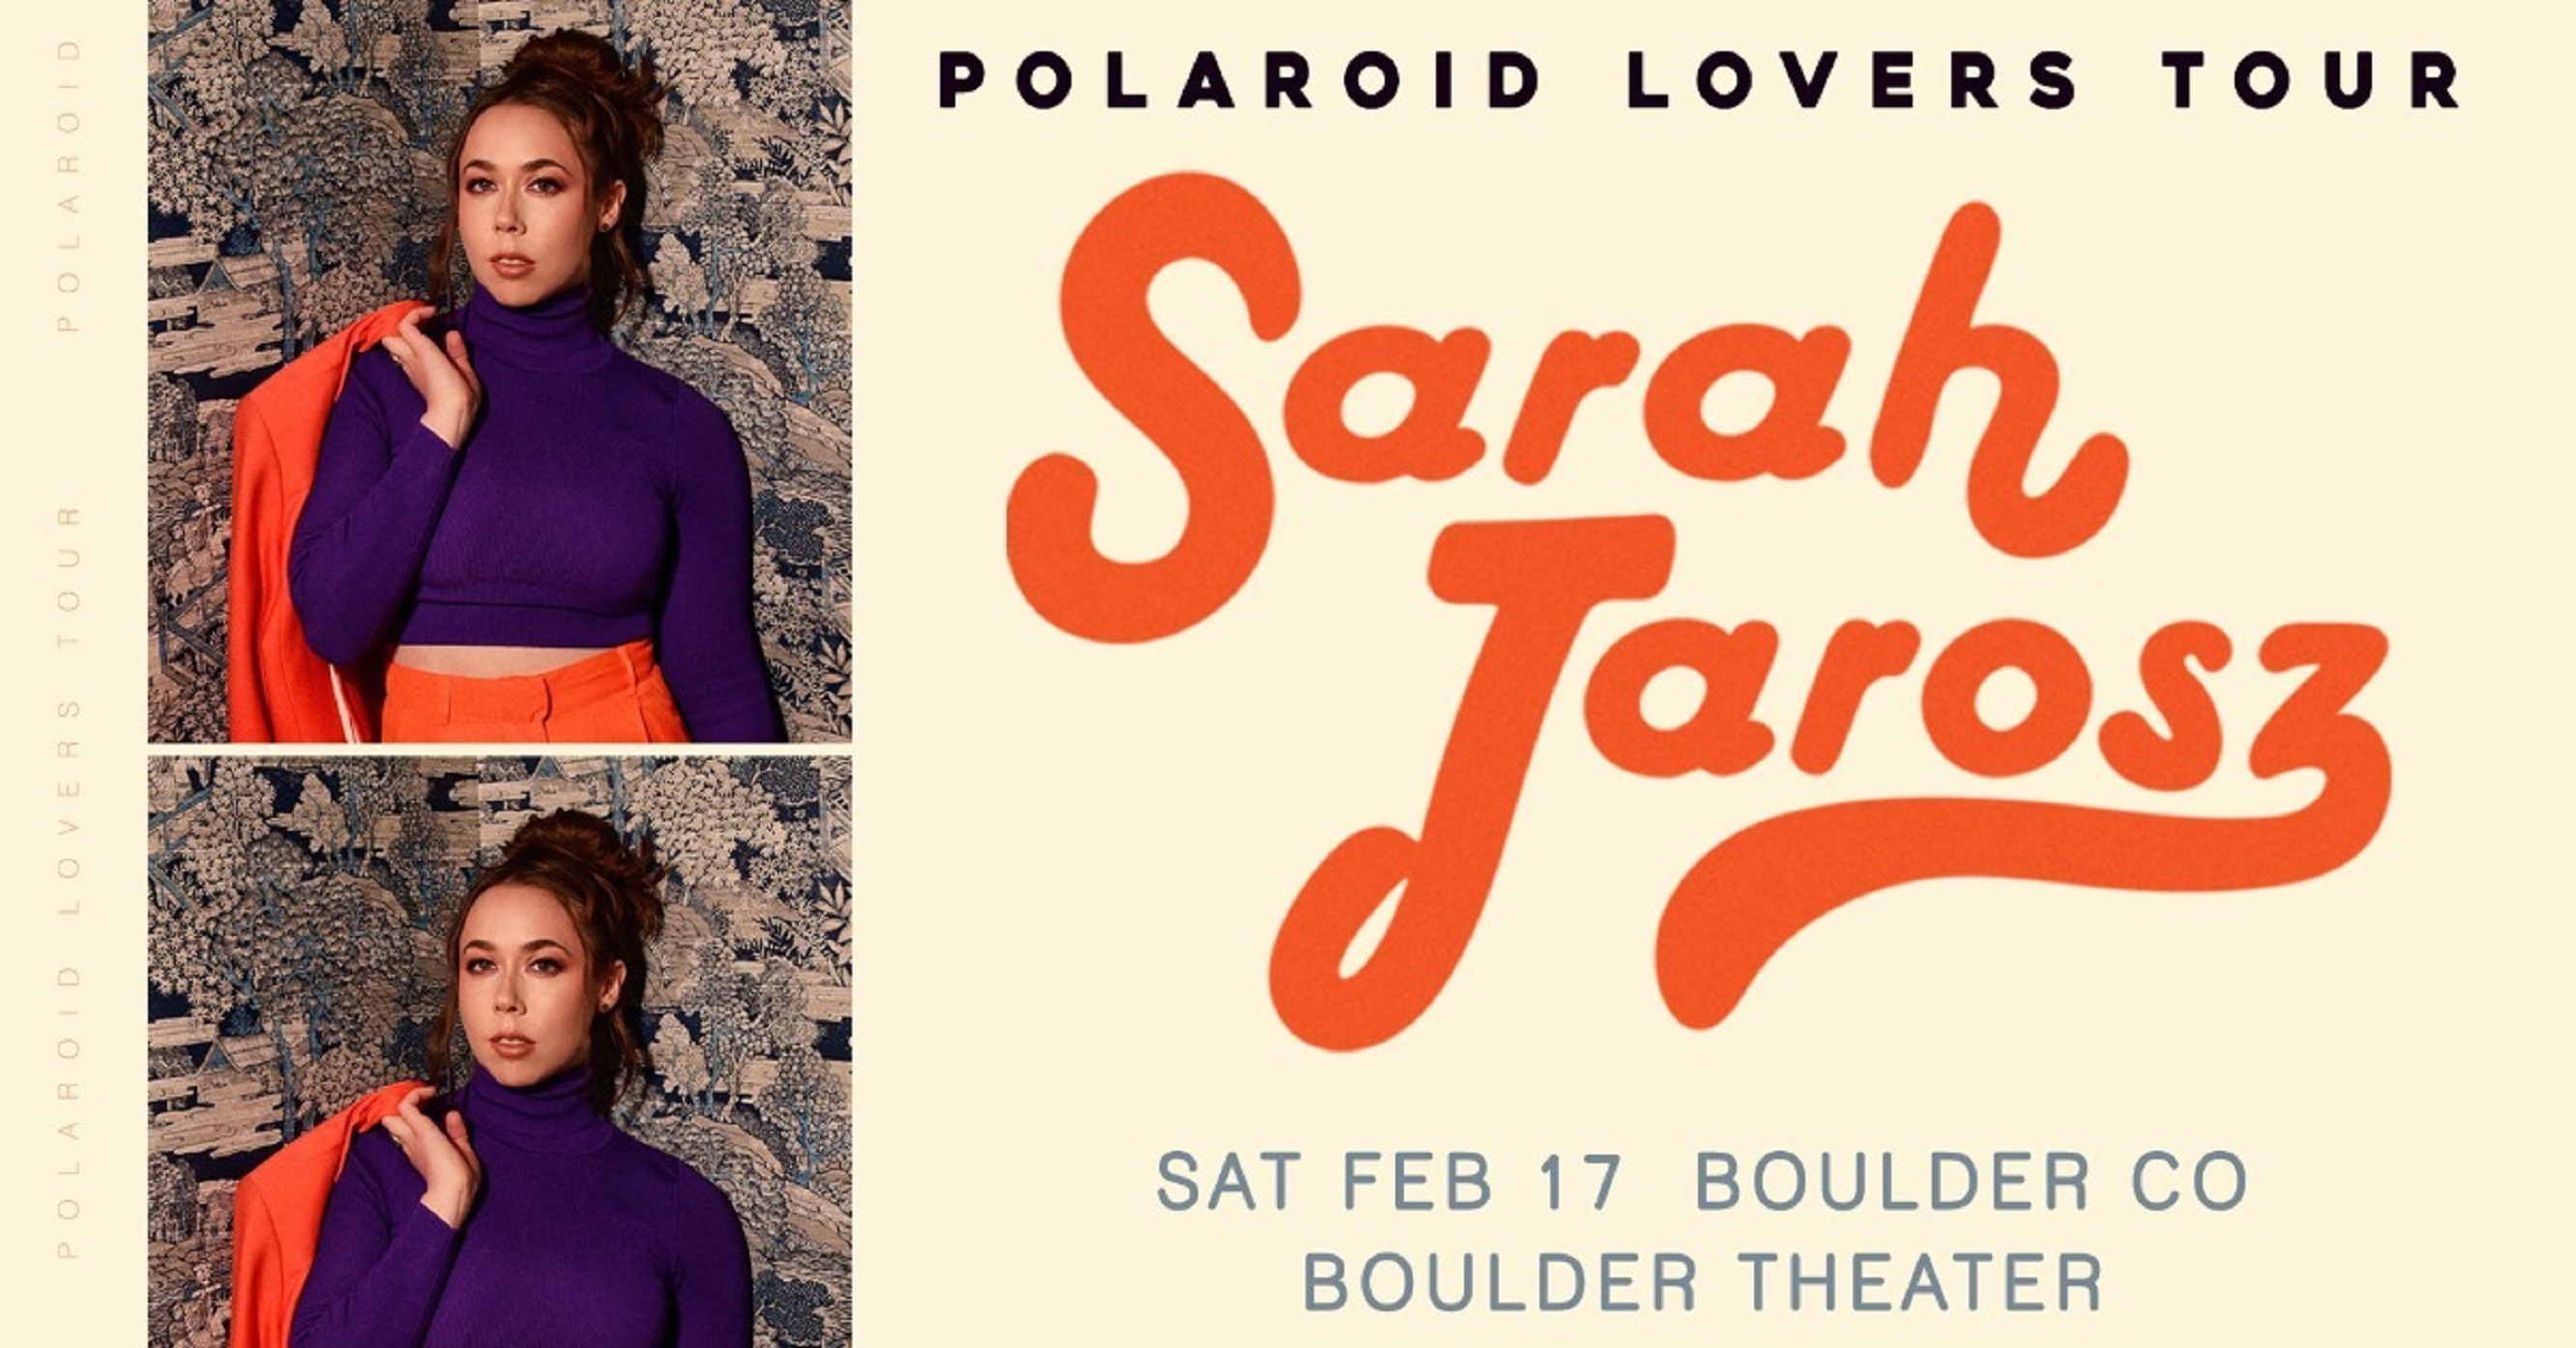 An Intimate Evening in Boulder with the Four-Time GRAMMY Winner: Sarah Jarosz